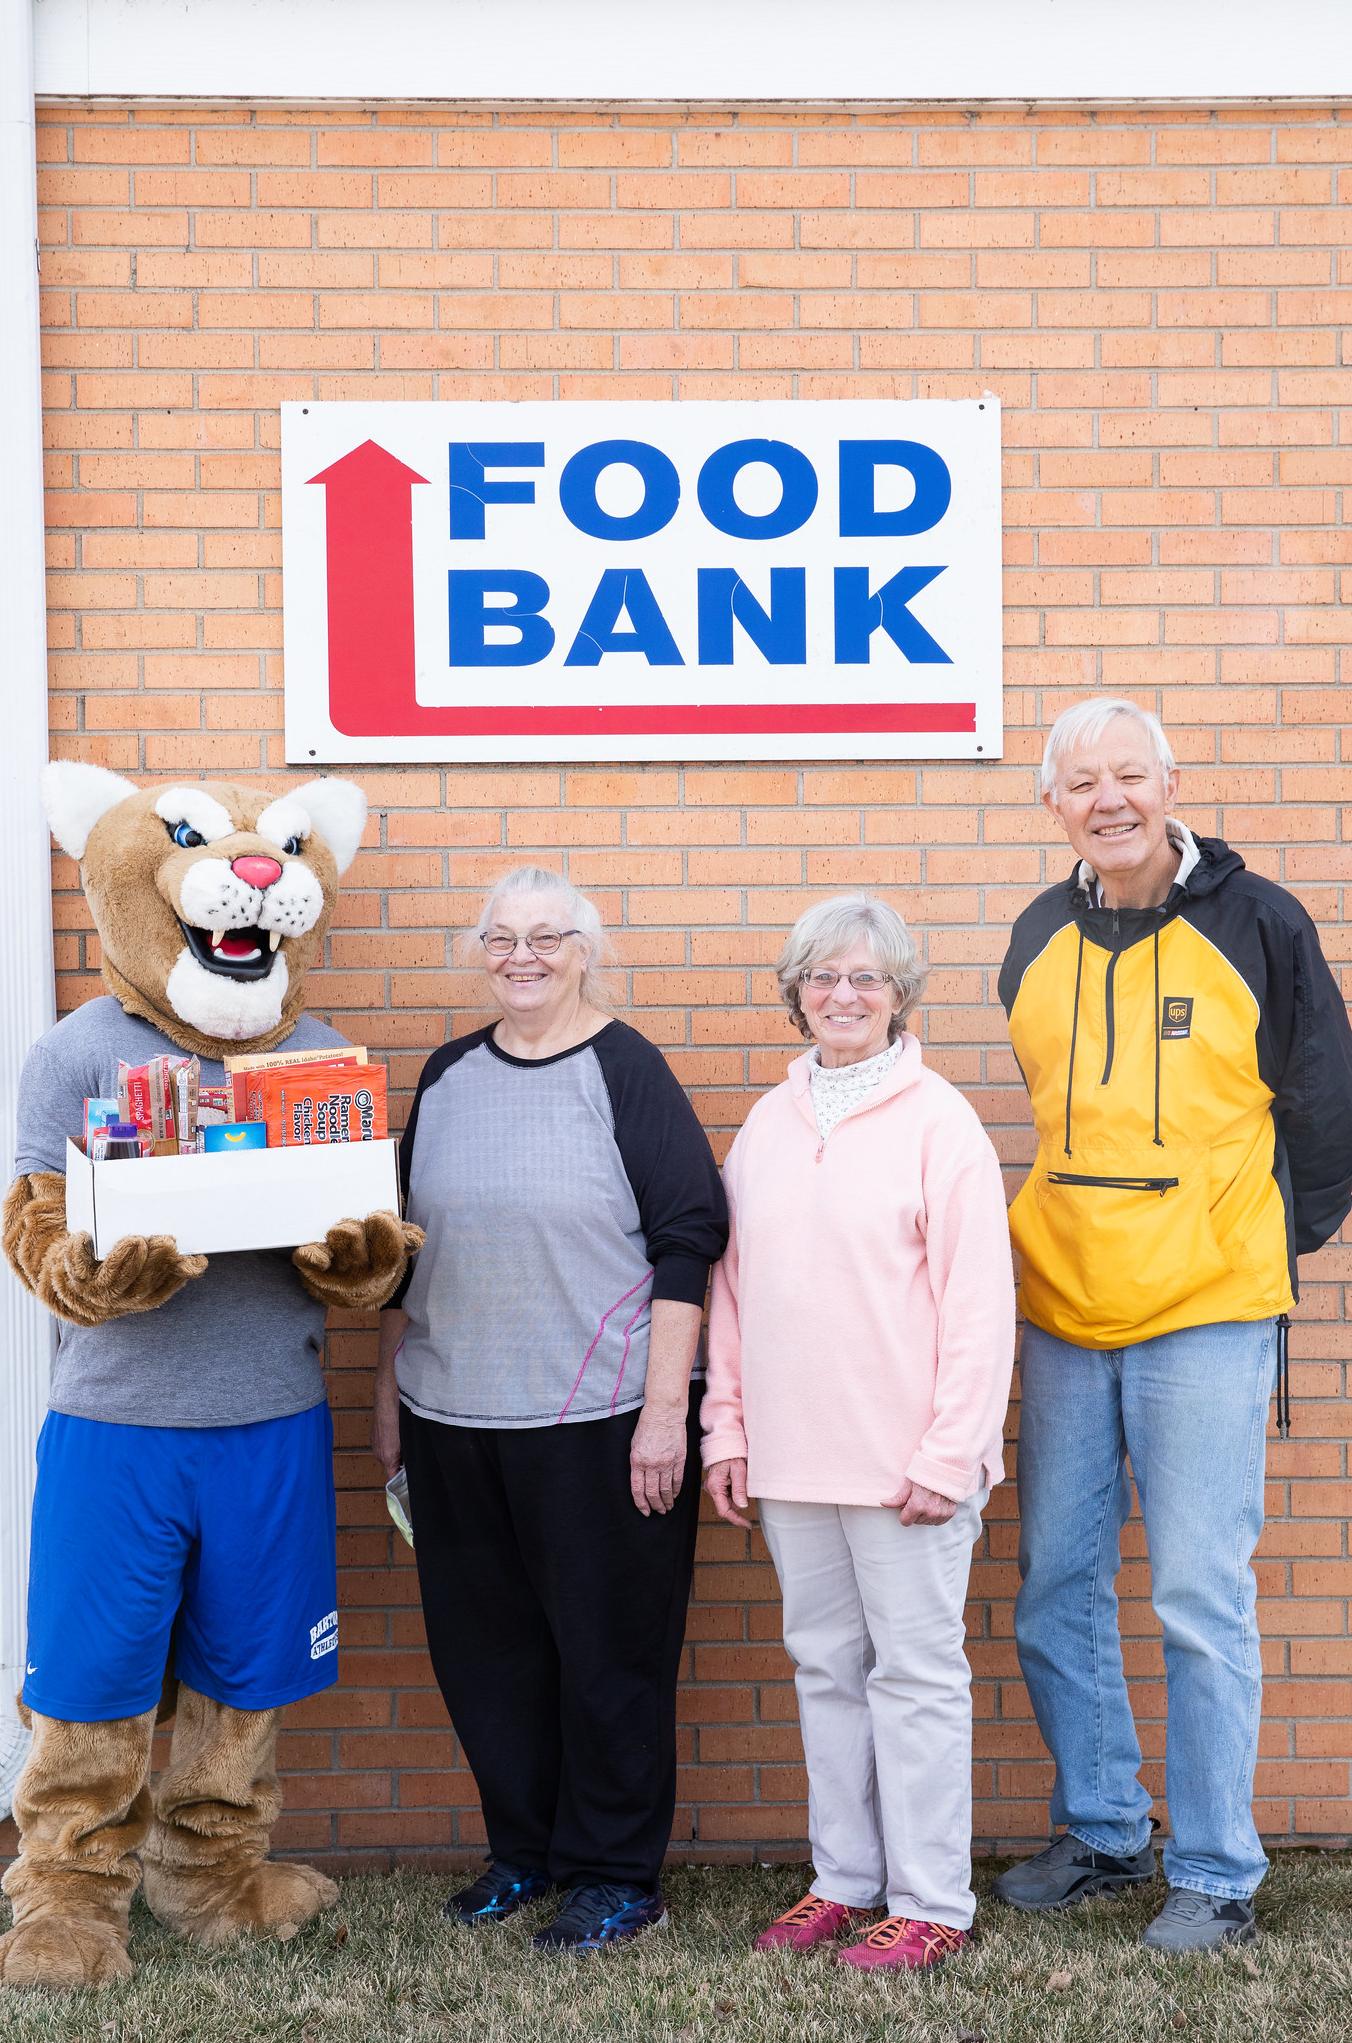 bart the cougar mascot holding food with food bank representatives next to him under the food bank sign